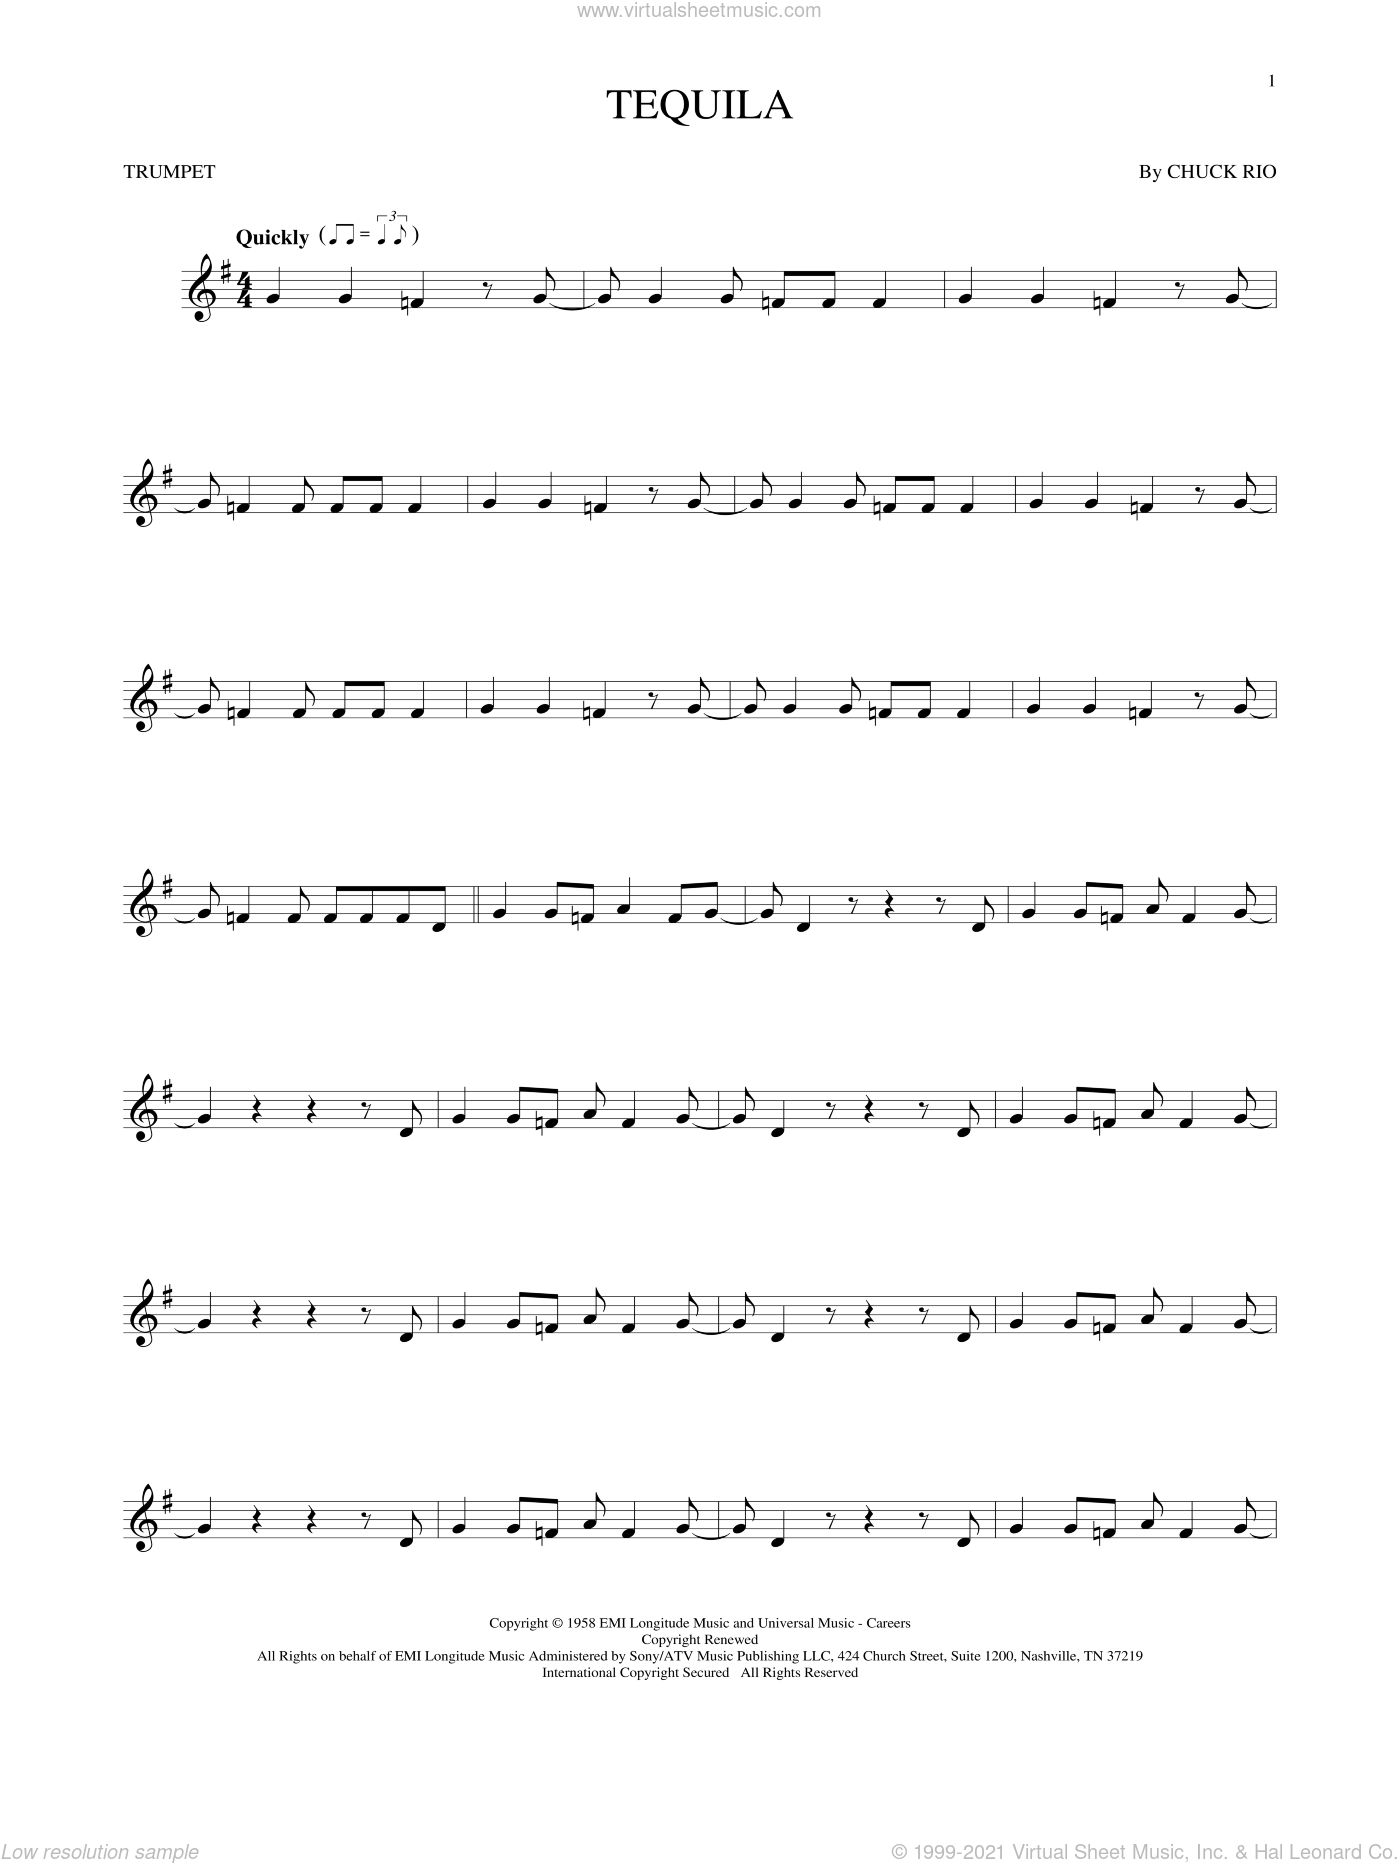 Champs - Tequila sheet music for trumpet solo (PDF-interactive) .